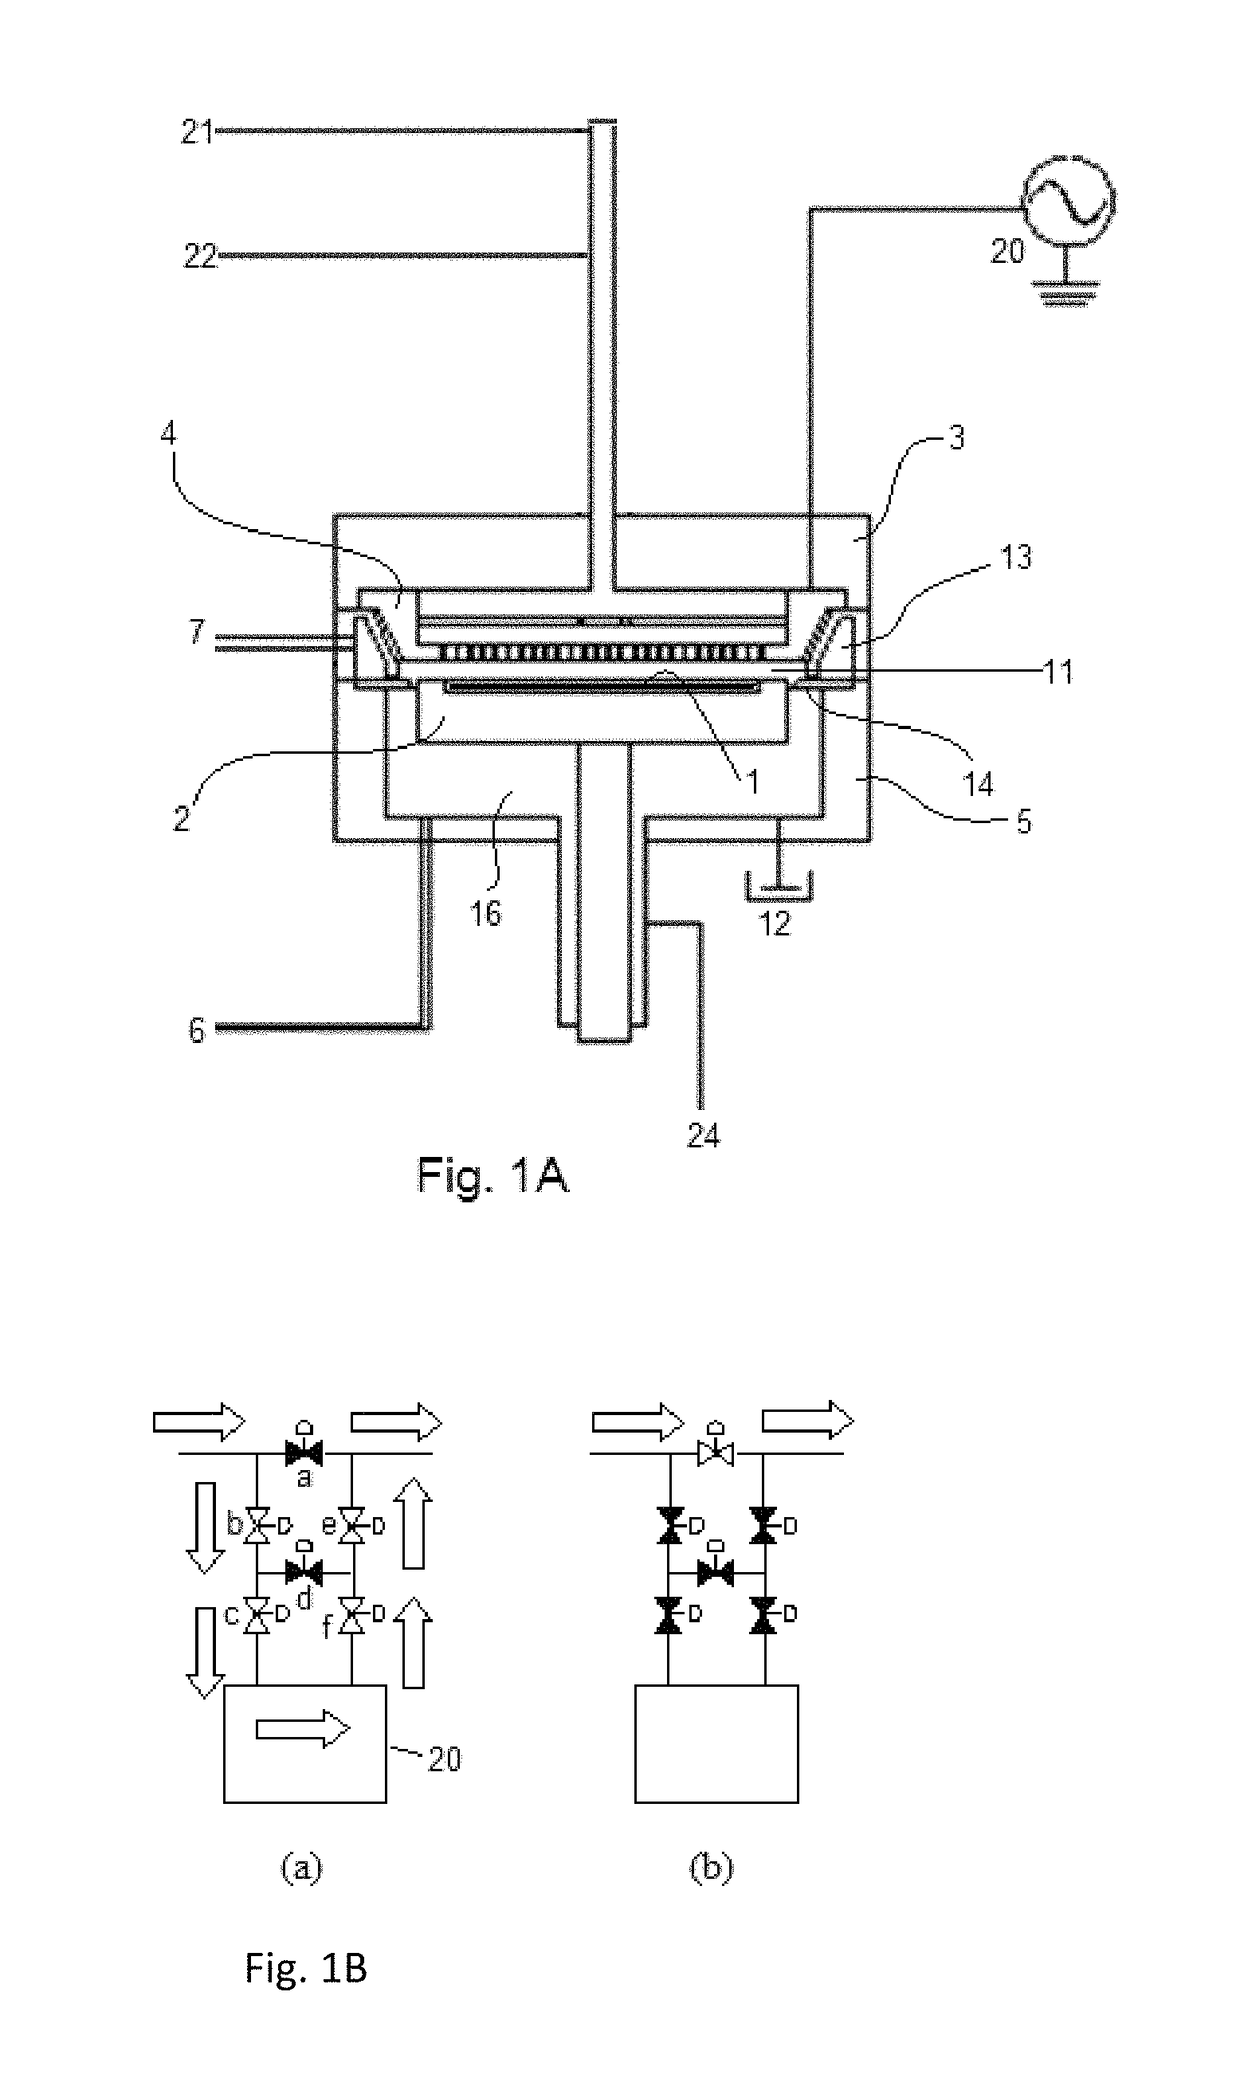 Method of plasma-assisted cyclic deposition using ramp-down flow of reactant gas